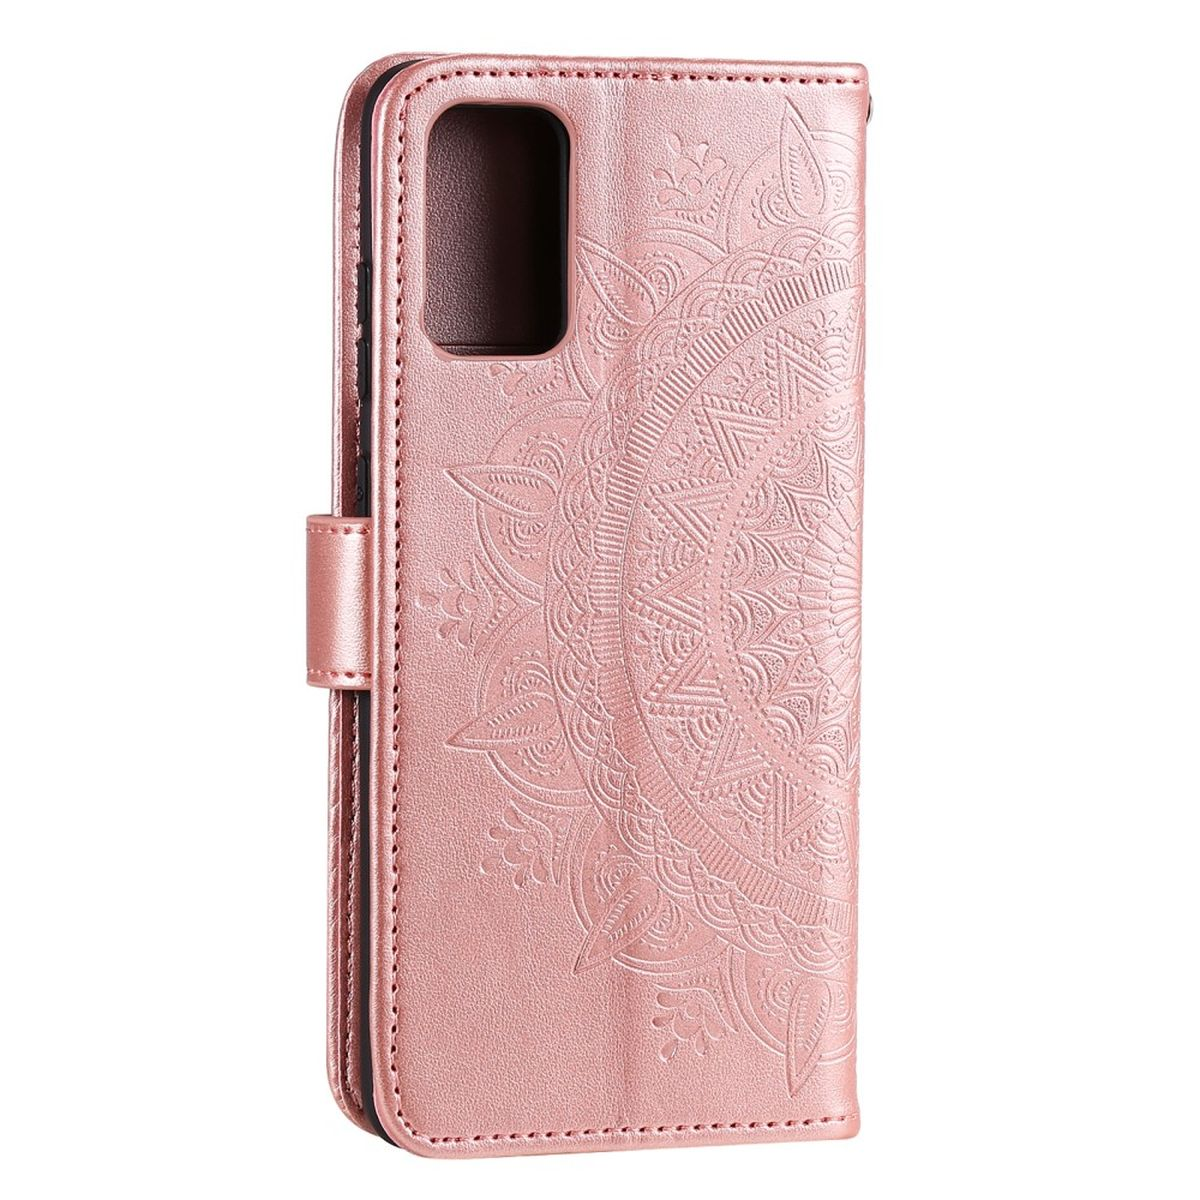 COVERKINGZ Klapphülle Muster, Rosegold Galaxy mit A33 Samsung, Bookcover, Mandala 5G